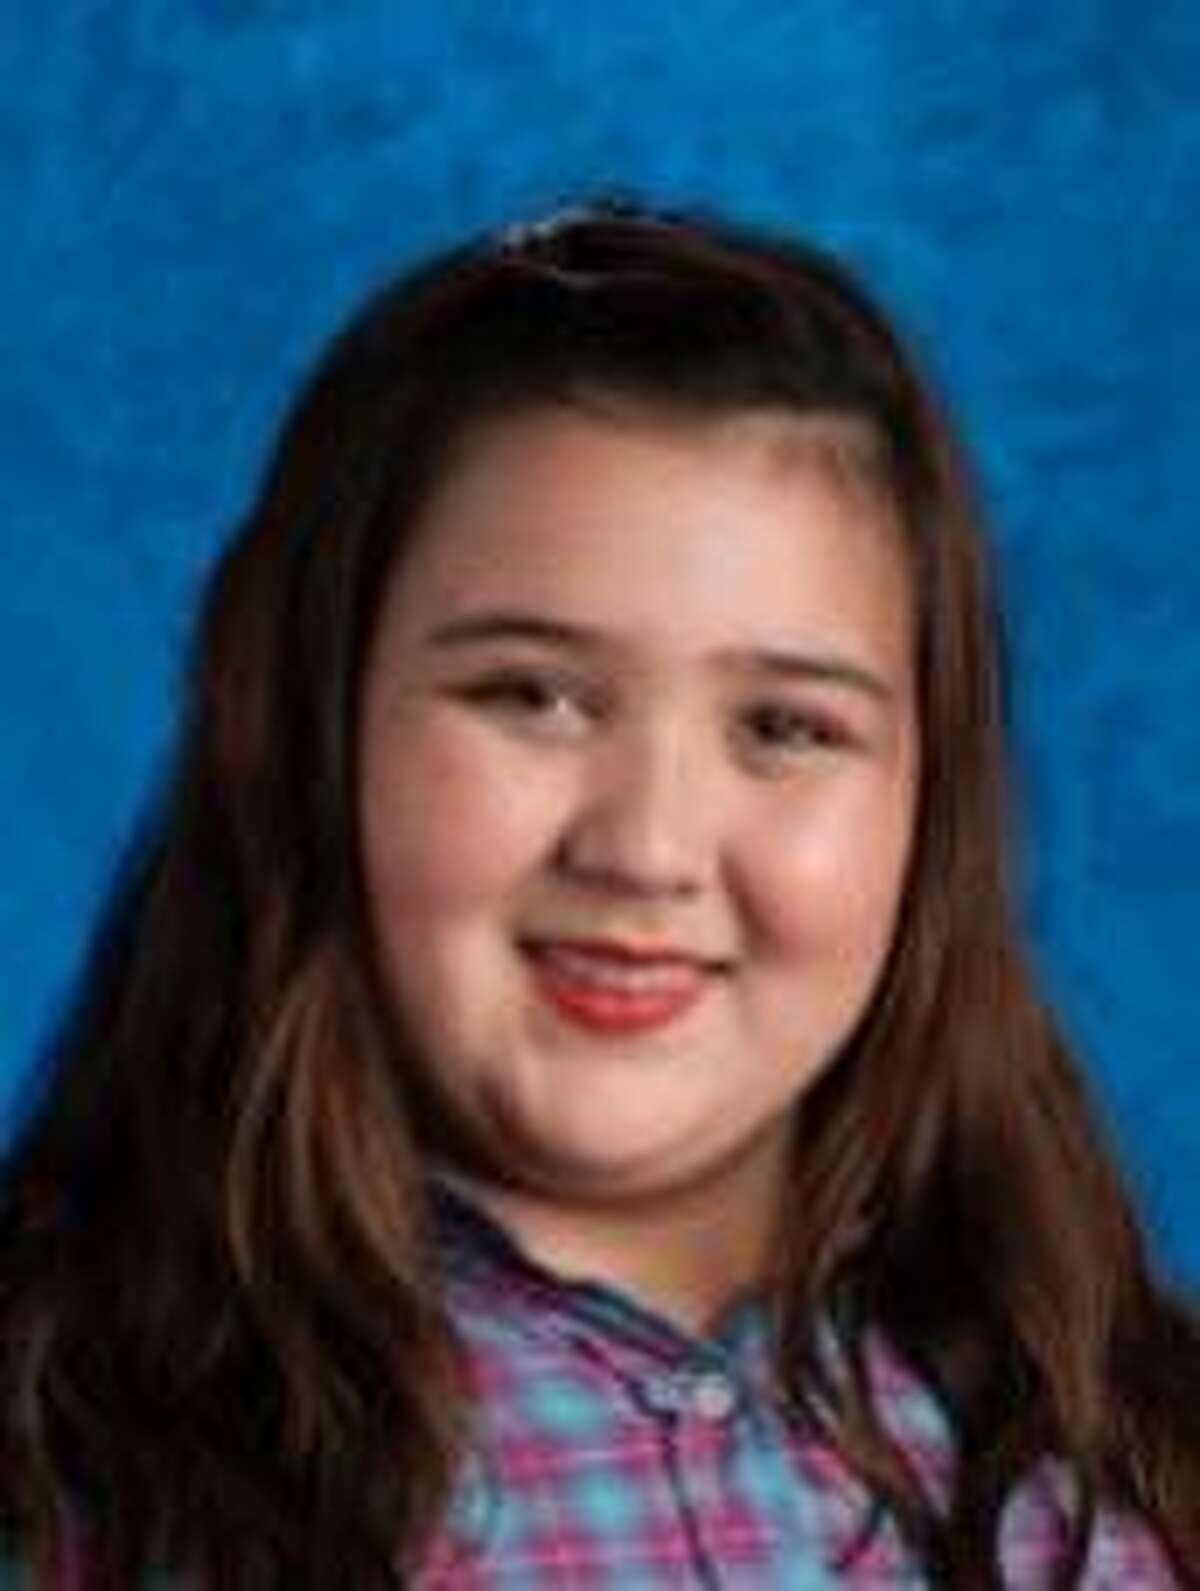 Mailani Godin, 12, died Thursday morning while walking to school on the North Side. Police said she was crossing West Avenue when she was hit by a Toyota Prius.